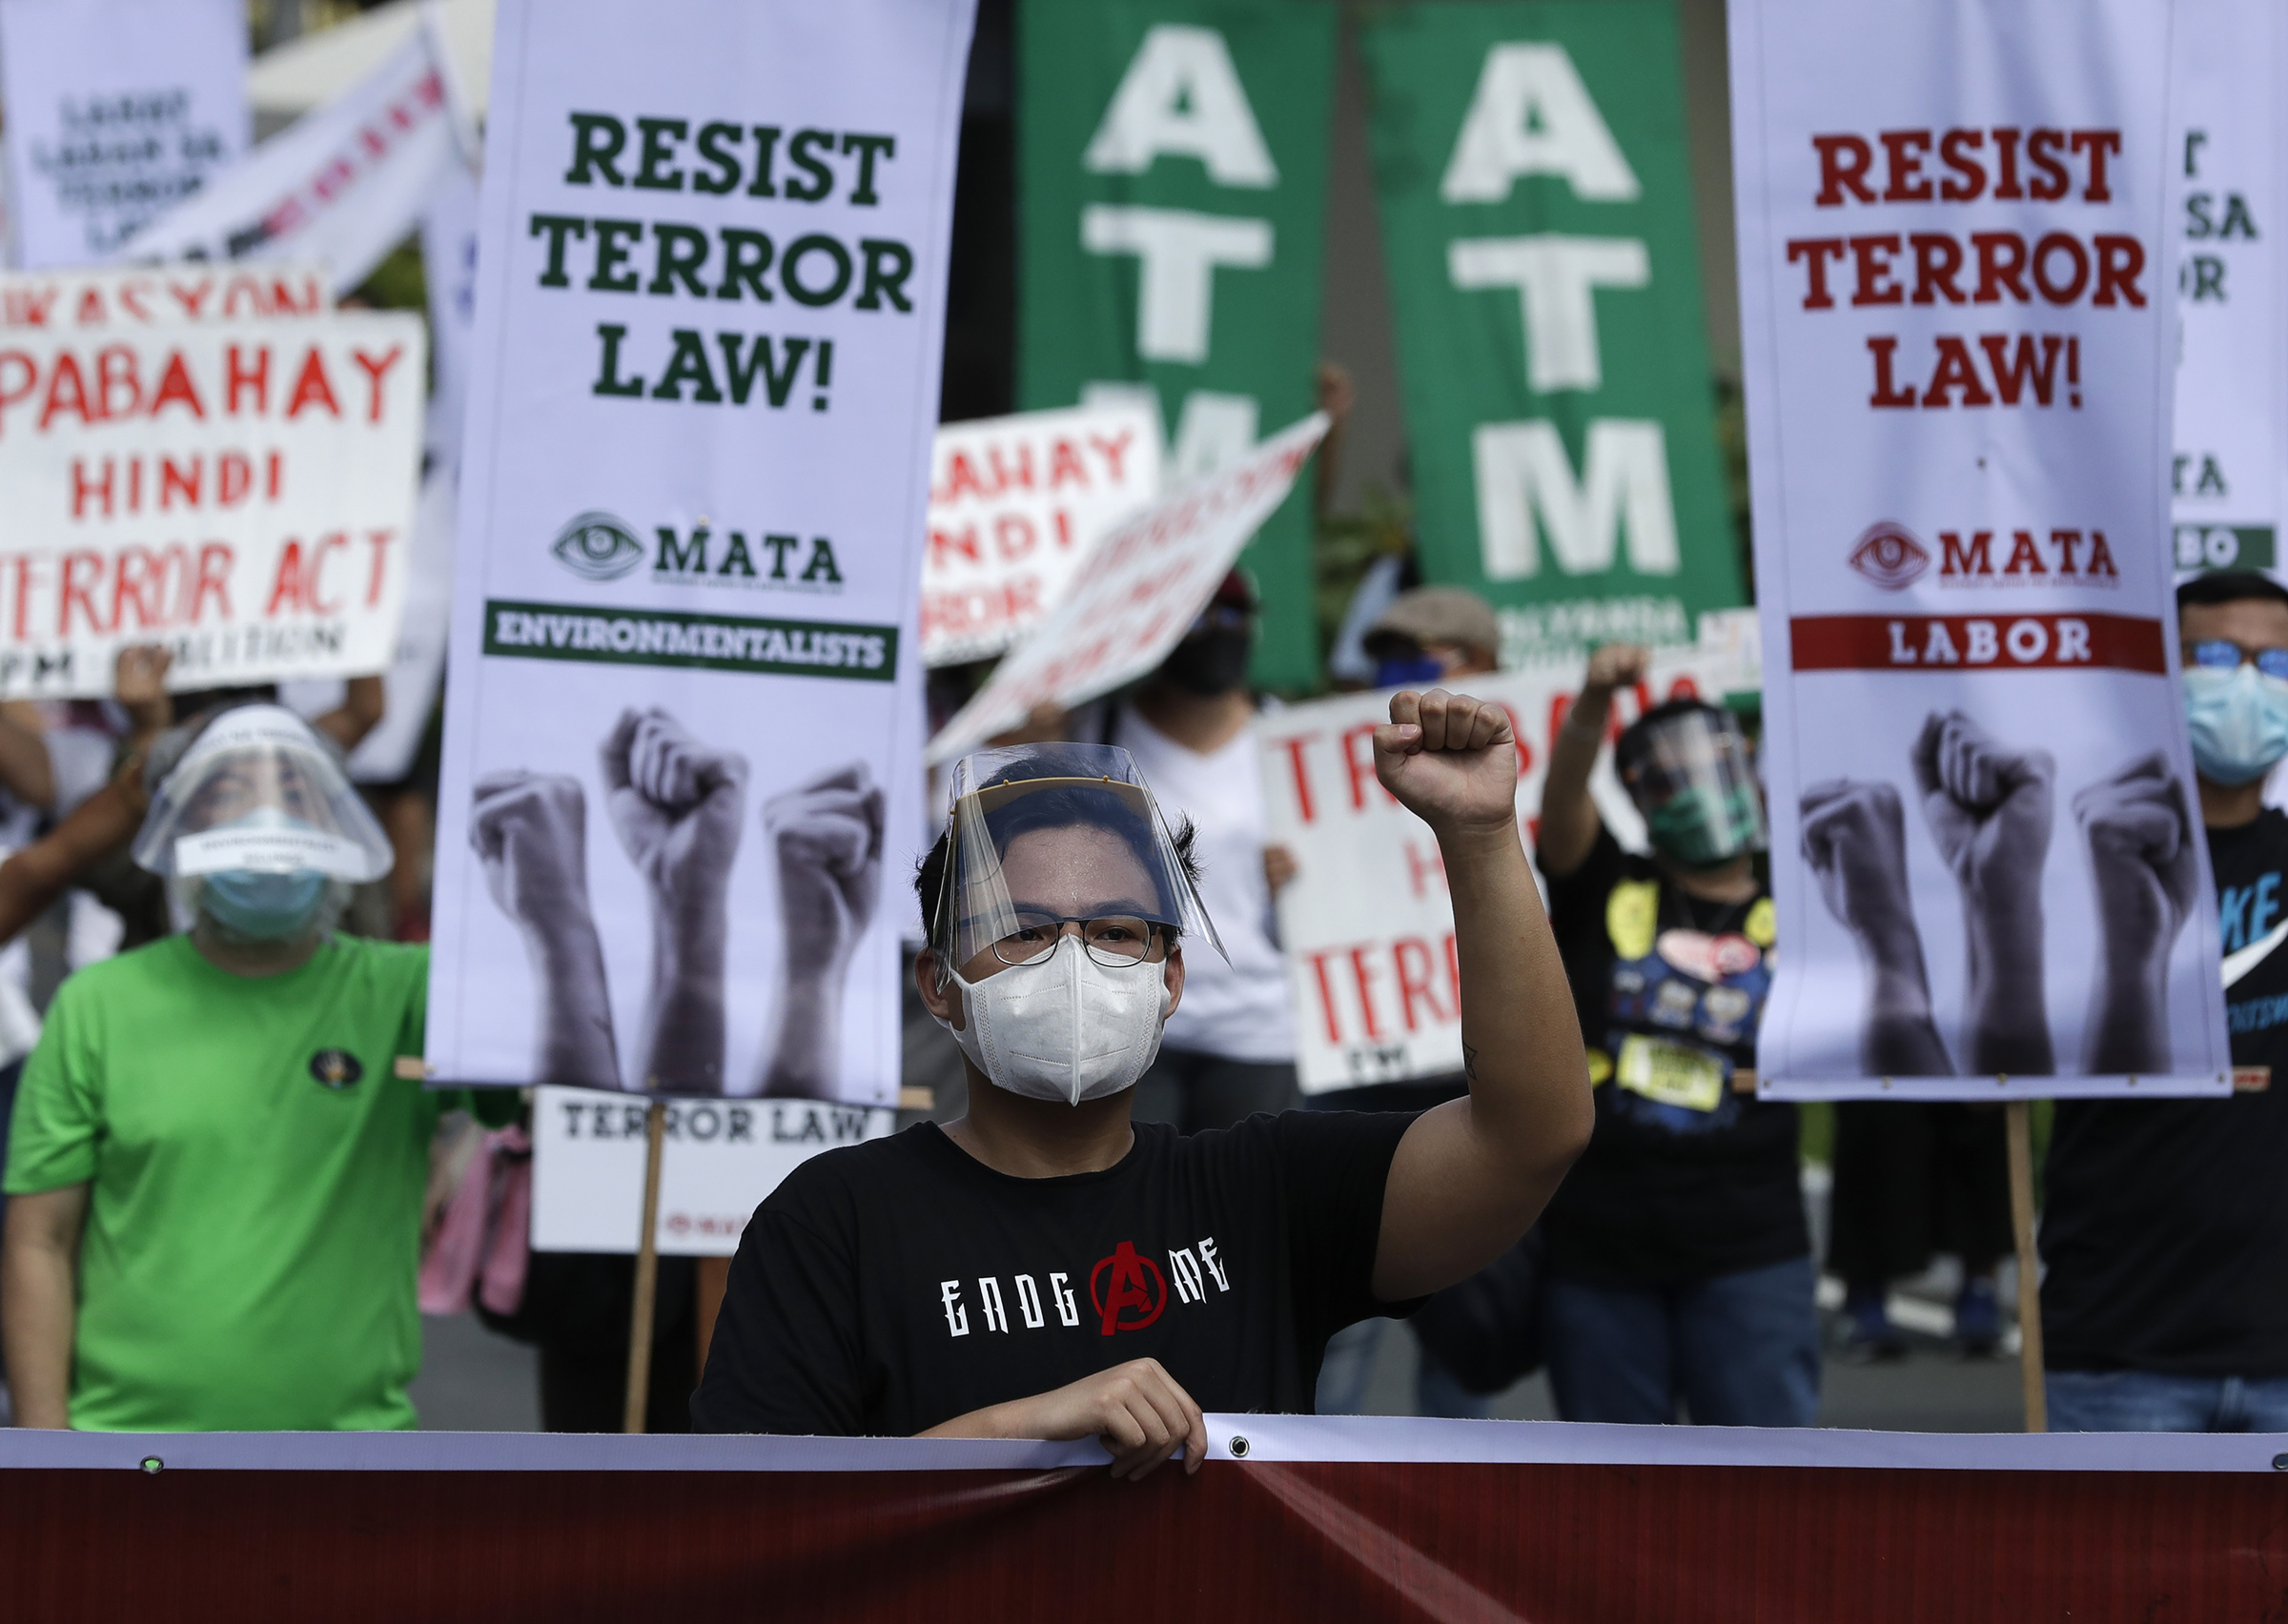 A man wearing protective mask holds a during a rally against the anti-terror law at the University of the Philippines in Manila, Philippines on Tuesday July 7, 2020. Philippine President Rodrigo Duterte recently signed a widely opposed anti-terror law which critics fear could be used against human rights defenders and to muzzle dissent. (AP Photo/Aaron Favila)